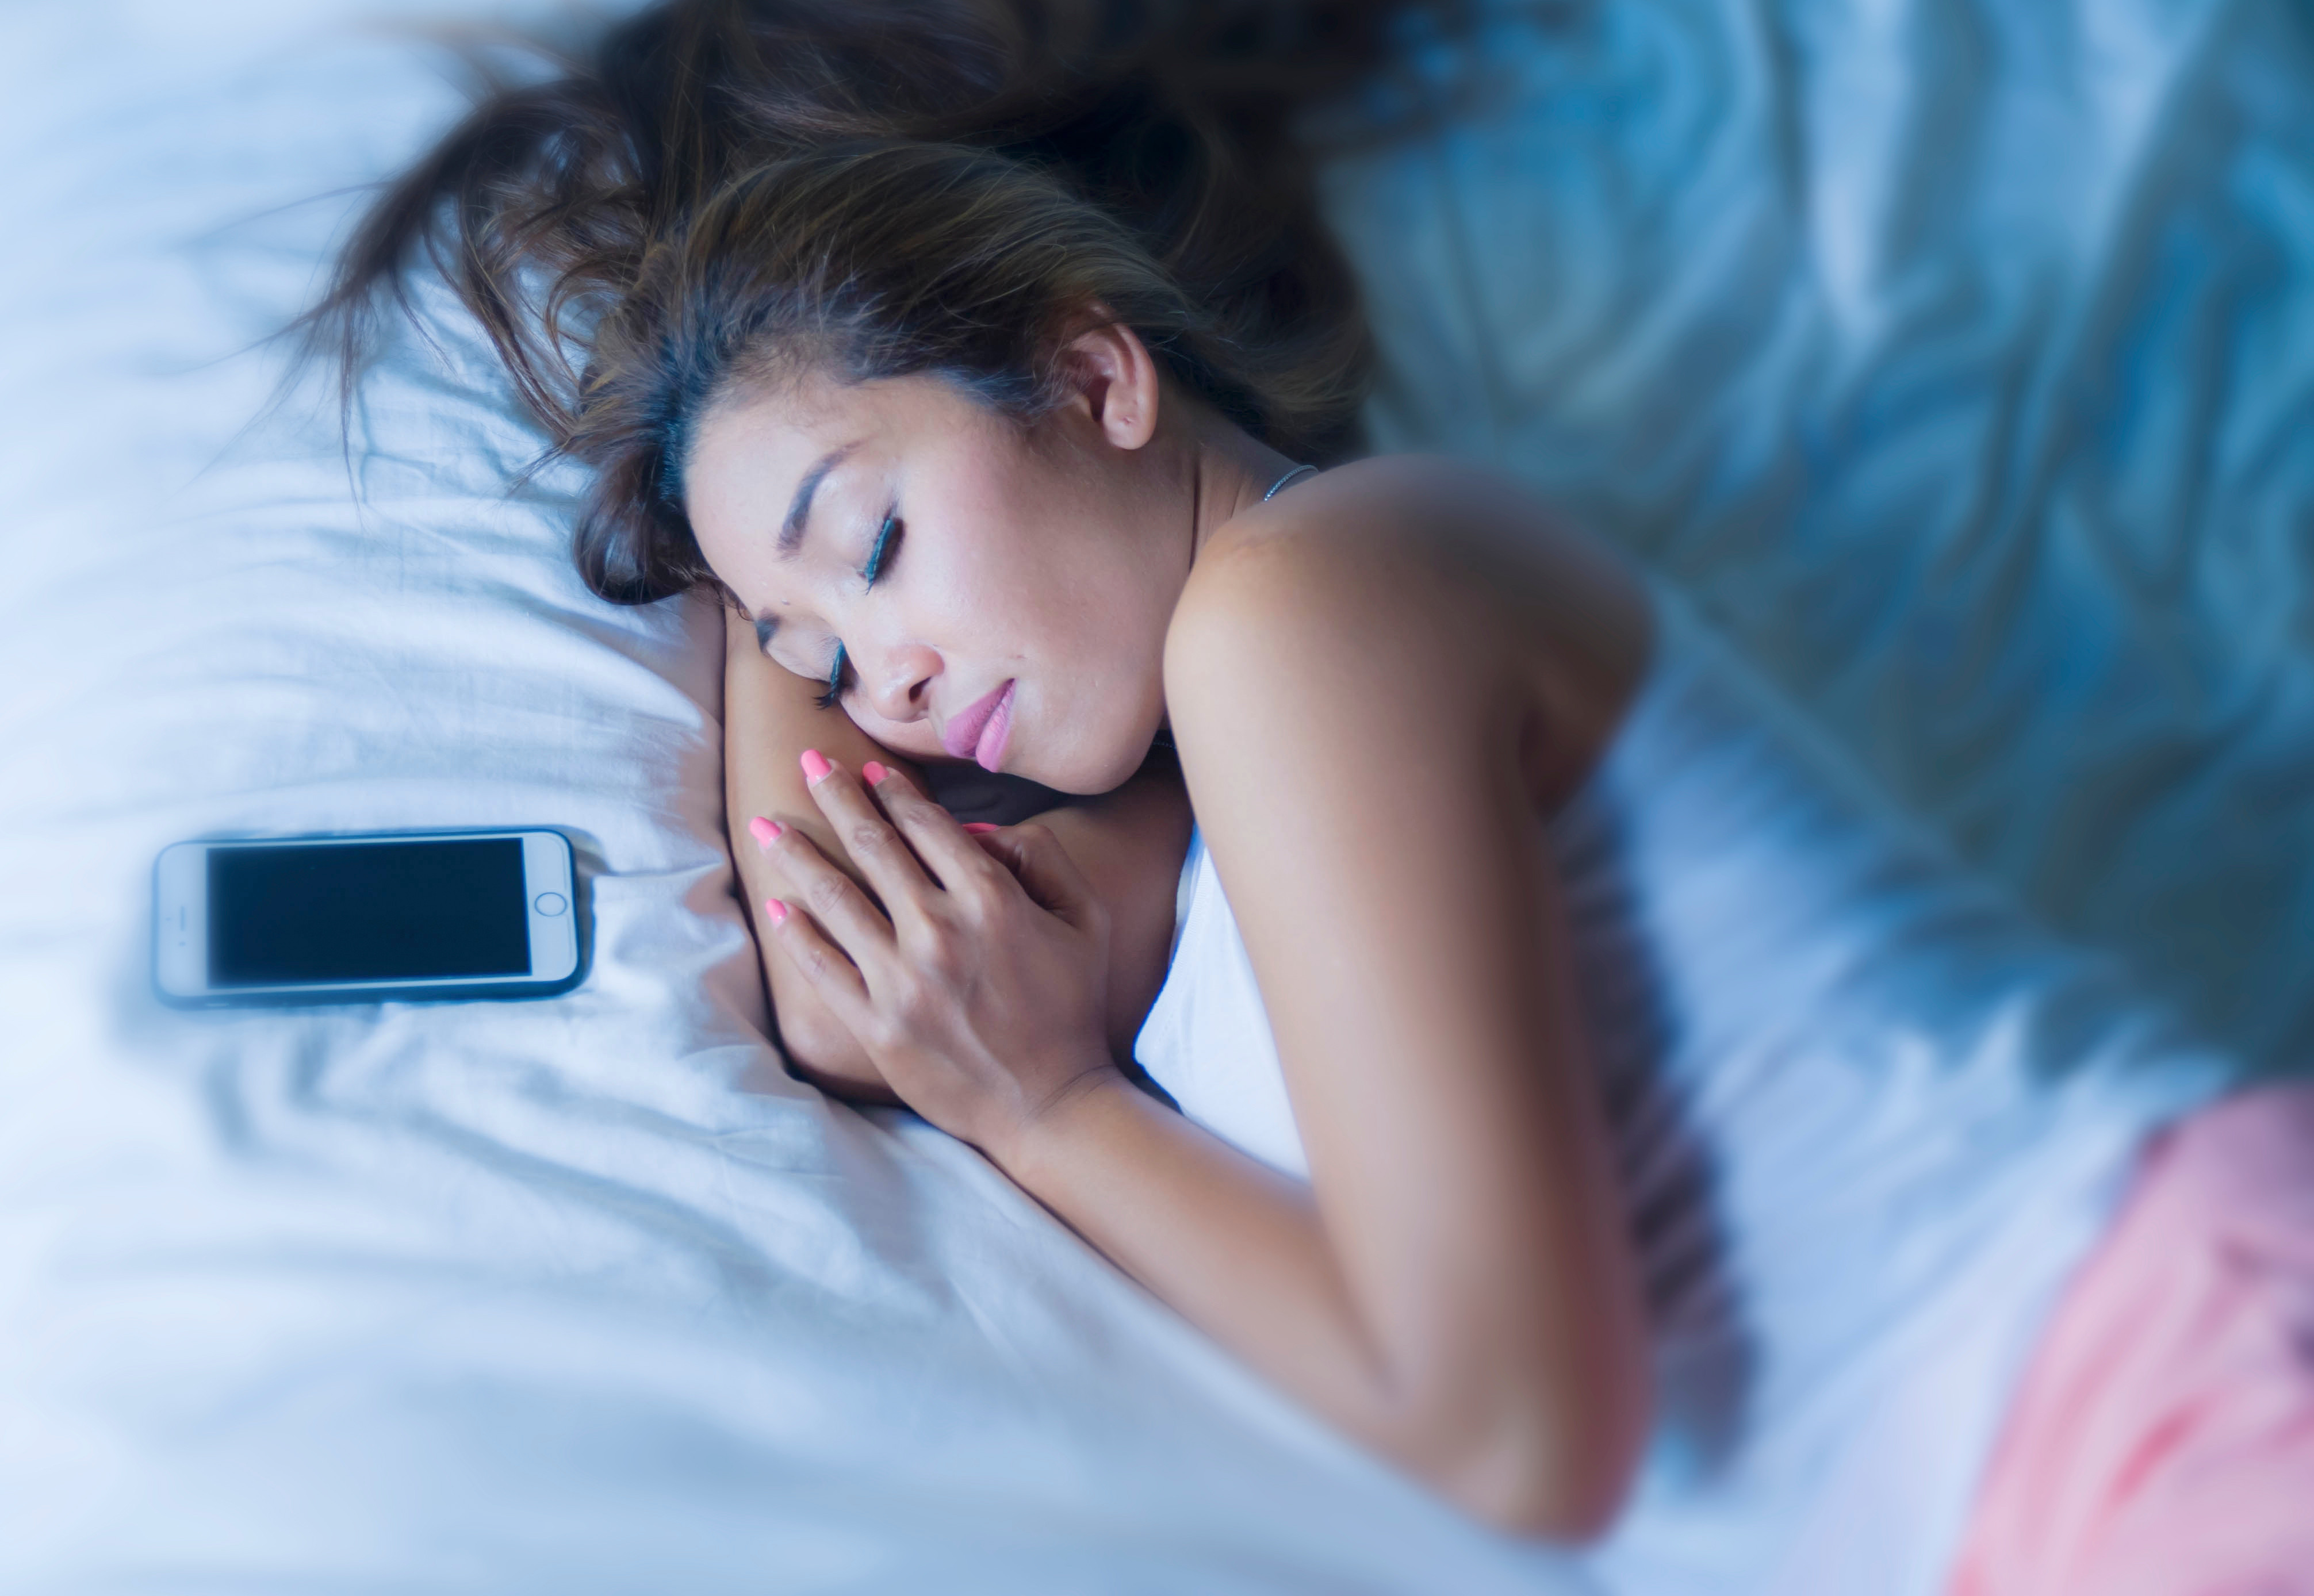 White noise apps, sleep trackers and other digital sleep aids are becoming more popular as people turn to tech to help them sleep, but do they really work? Photo: Shutterstock